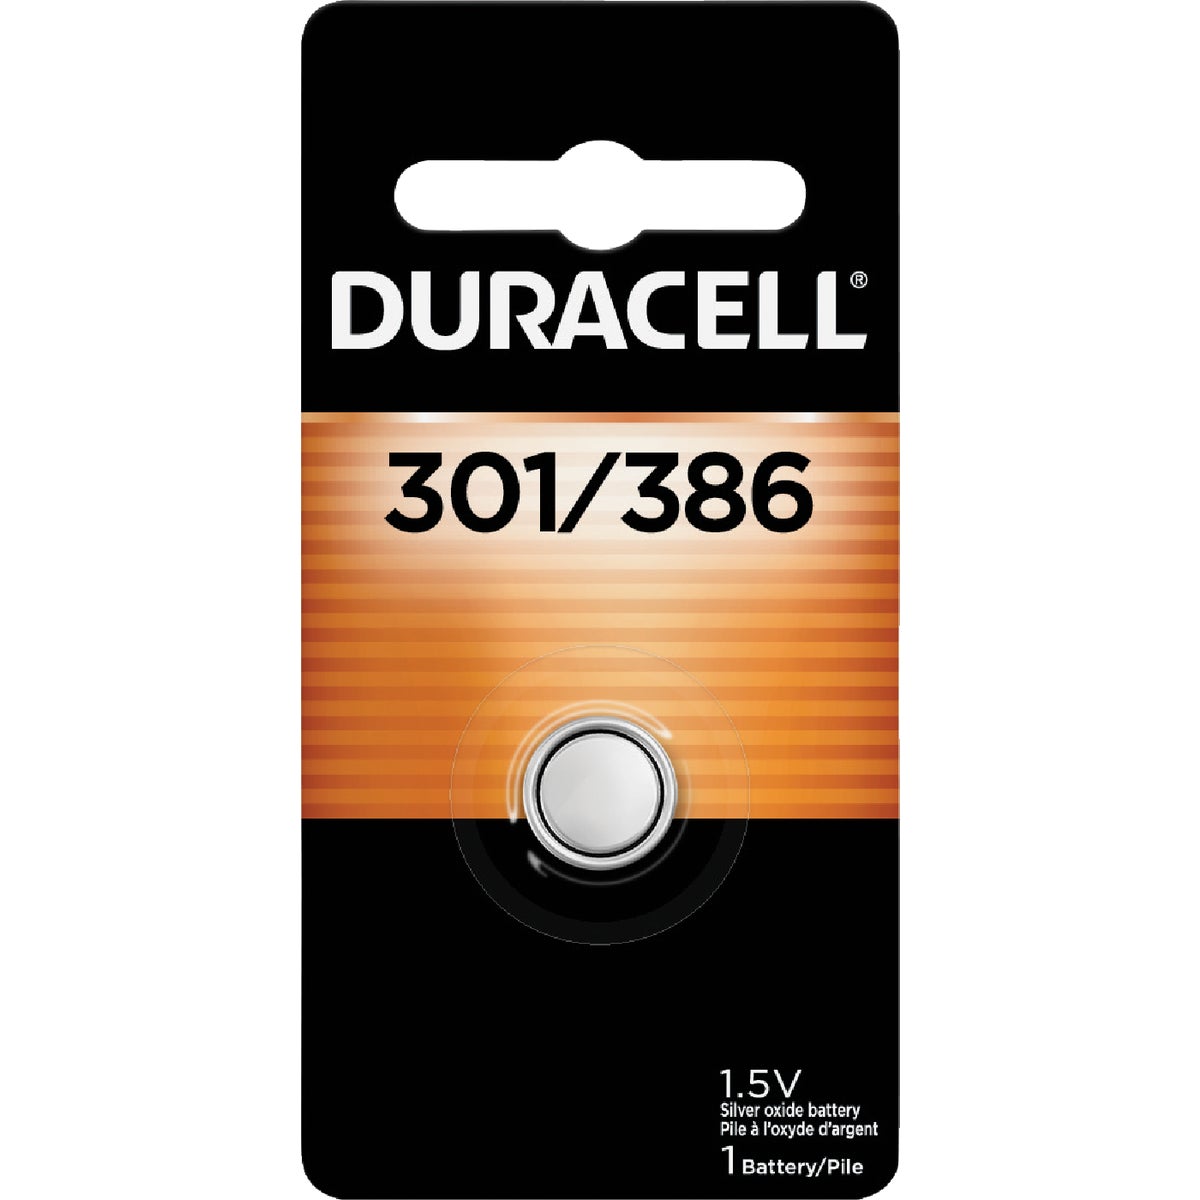 Duracell 301/386 Silver Oxide Button Cell Battery